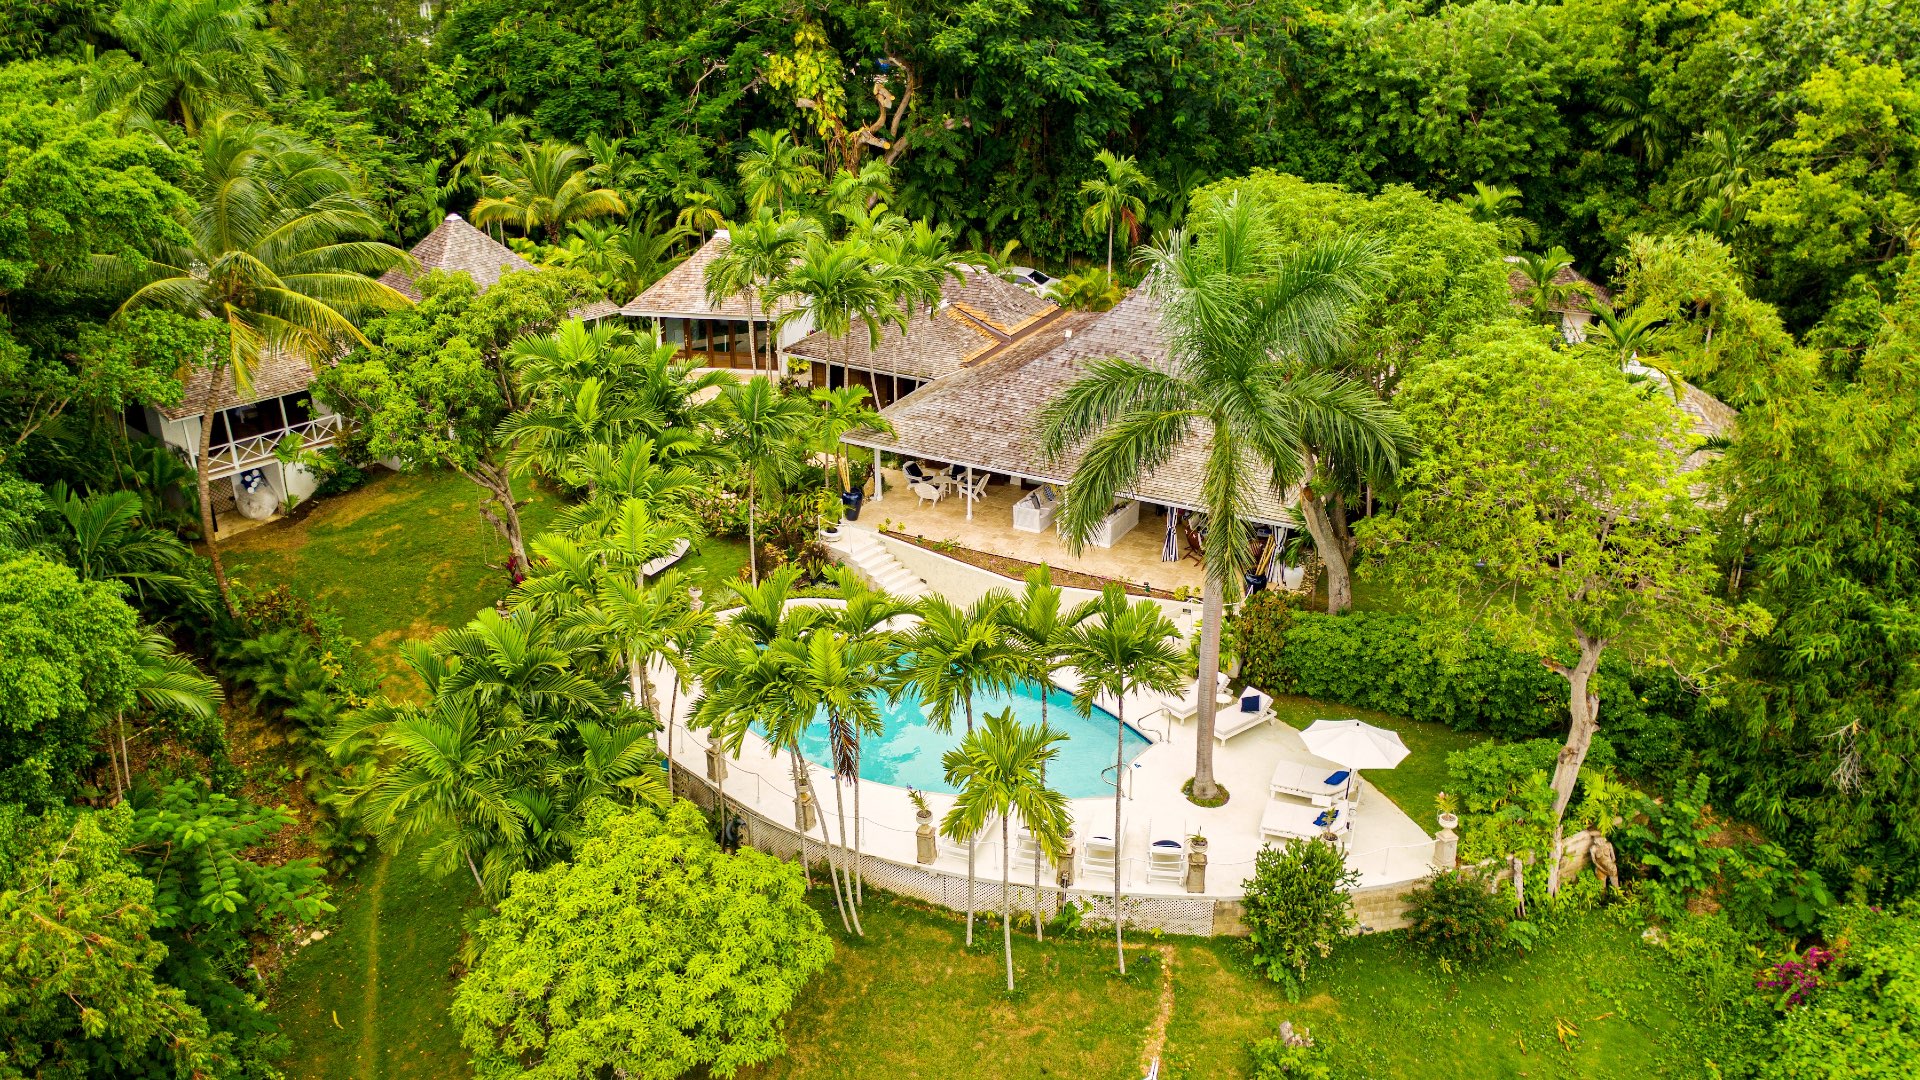 3 Reasons to Rent a Villa in Jamaica